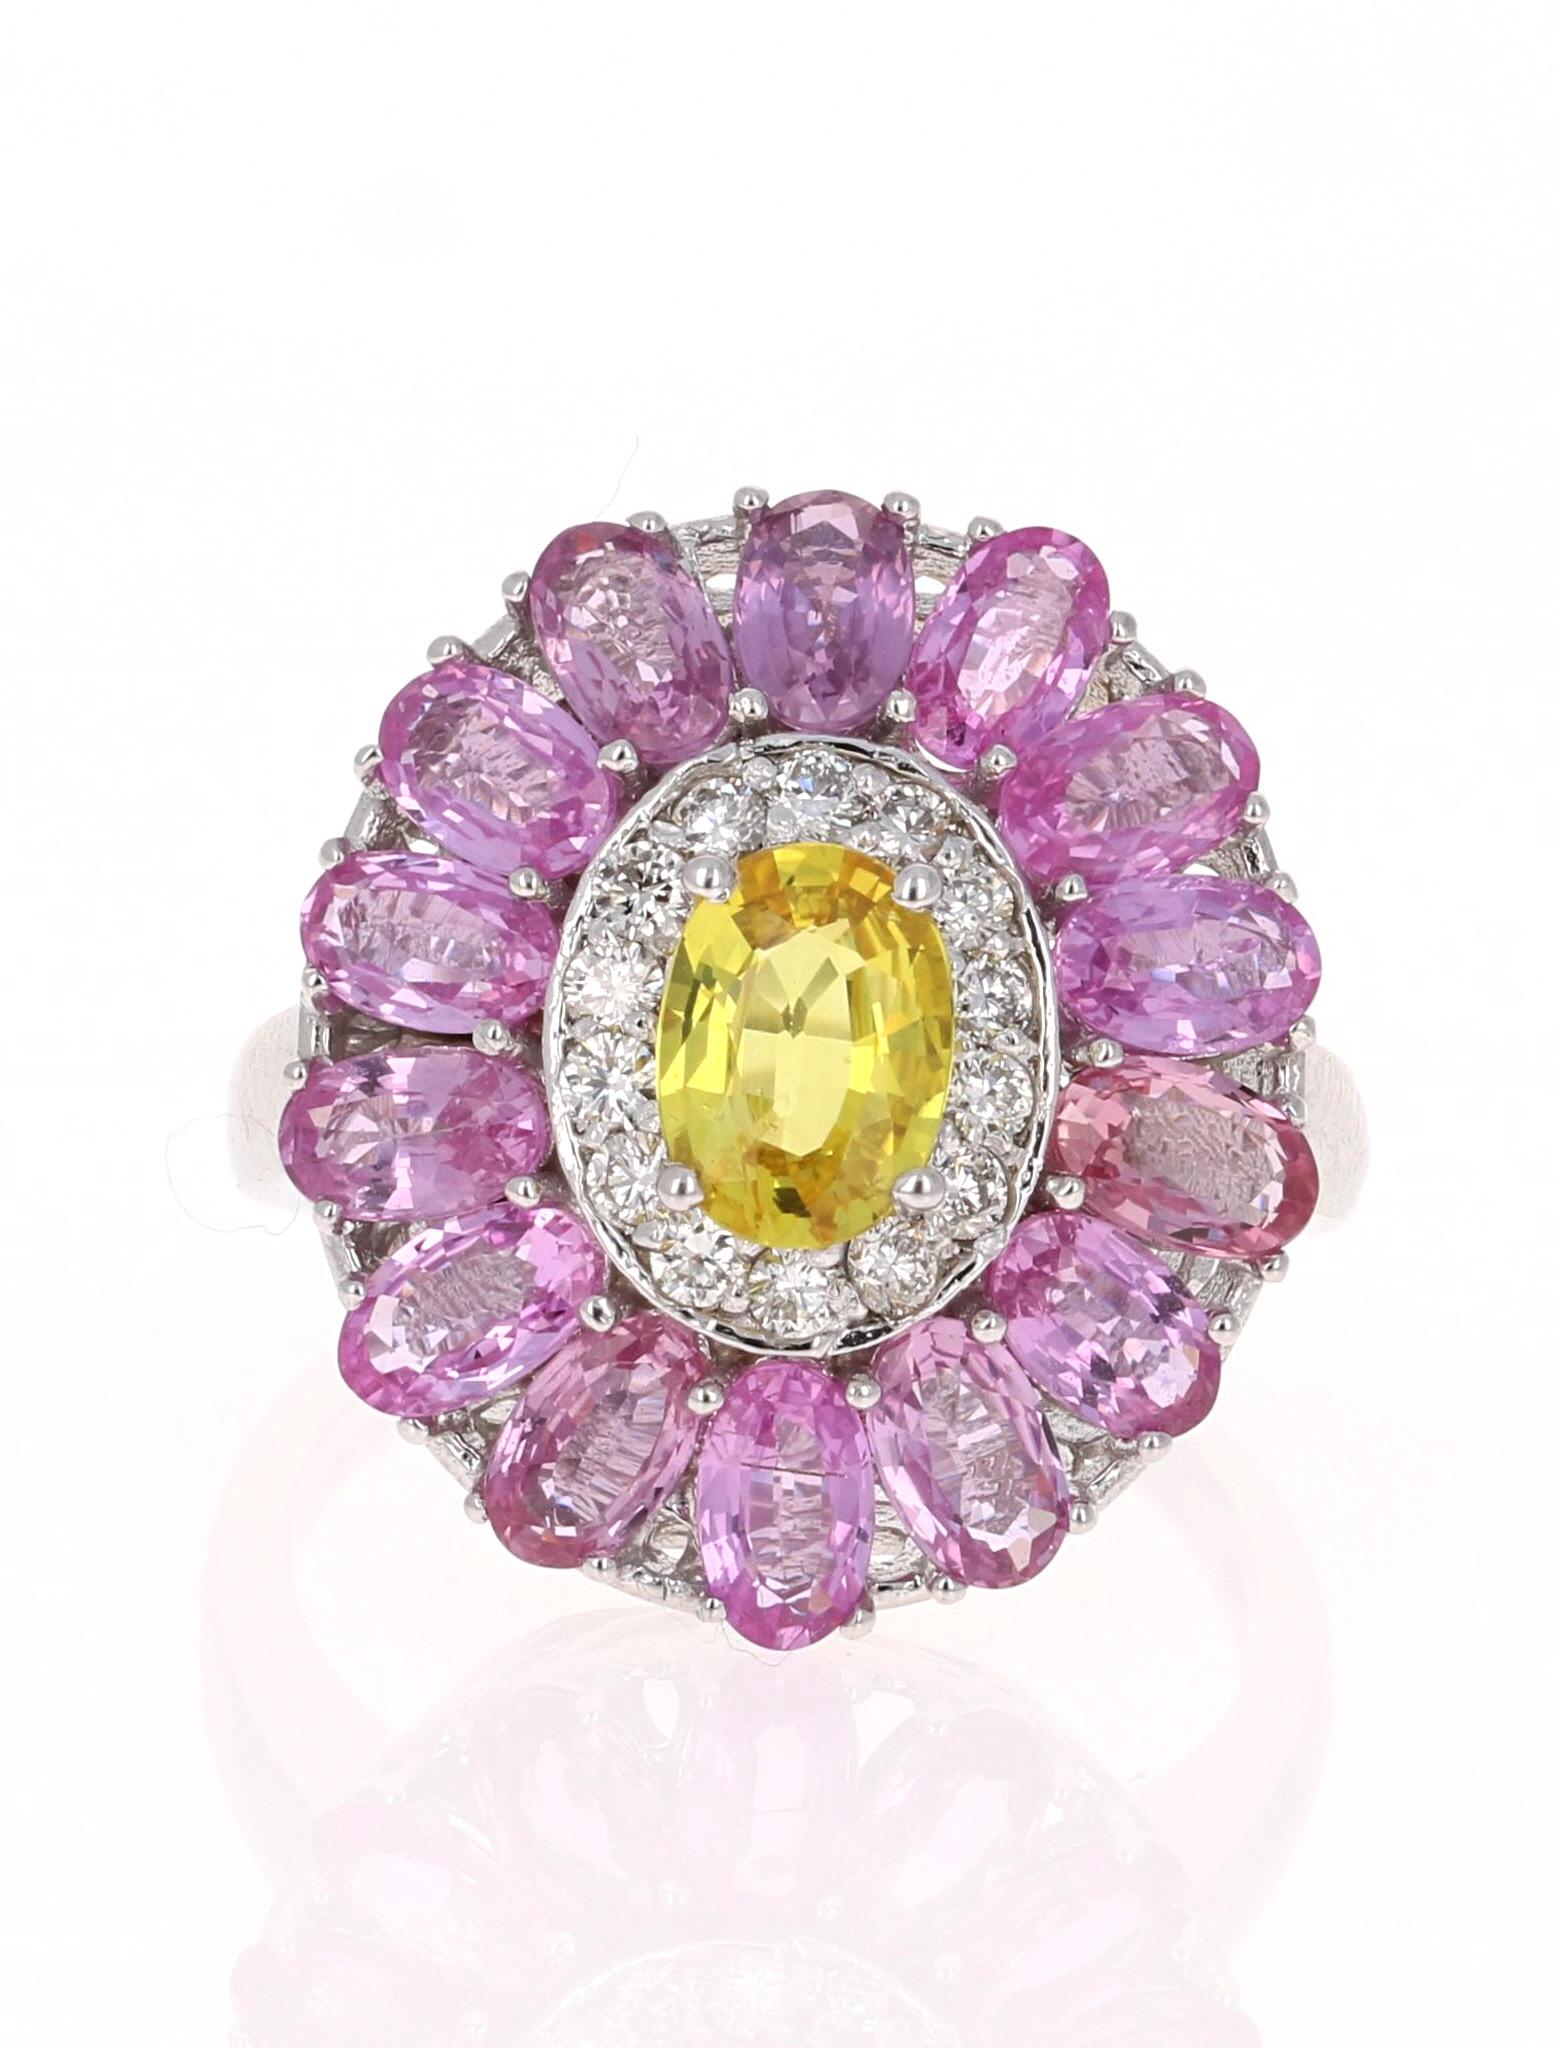 The Cutest Cocktail Ring!

This beautiful ring has a Yellow Sapphire that weighs 0.87 Carats and Pink Sapphires that weigh 4.07 Carats. There are 14 Round Cut Diamonds that weigh 0.30 Carats. The total carat weight of the ring is 5.24 Carats.